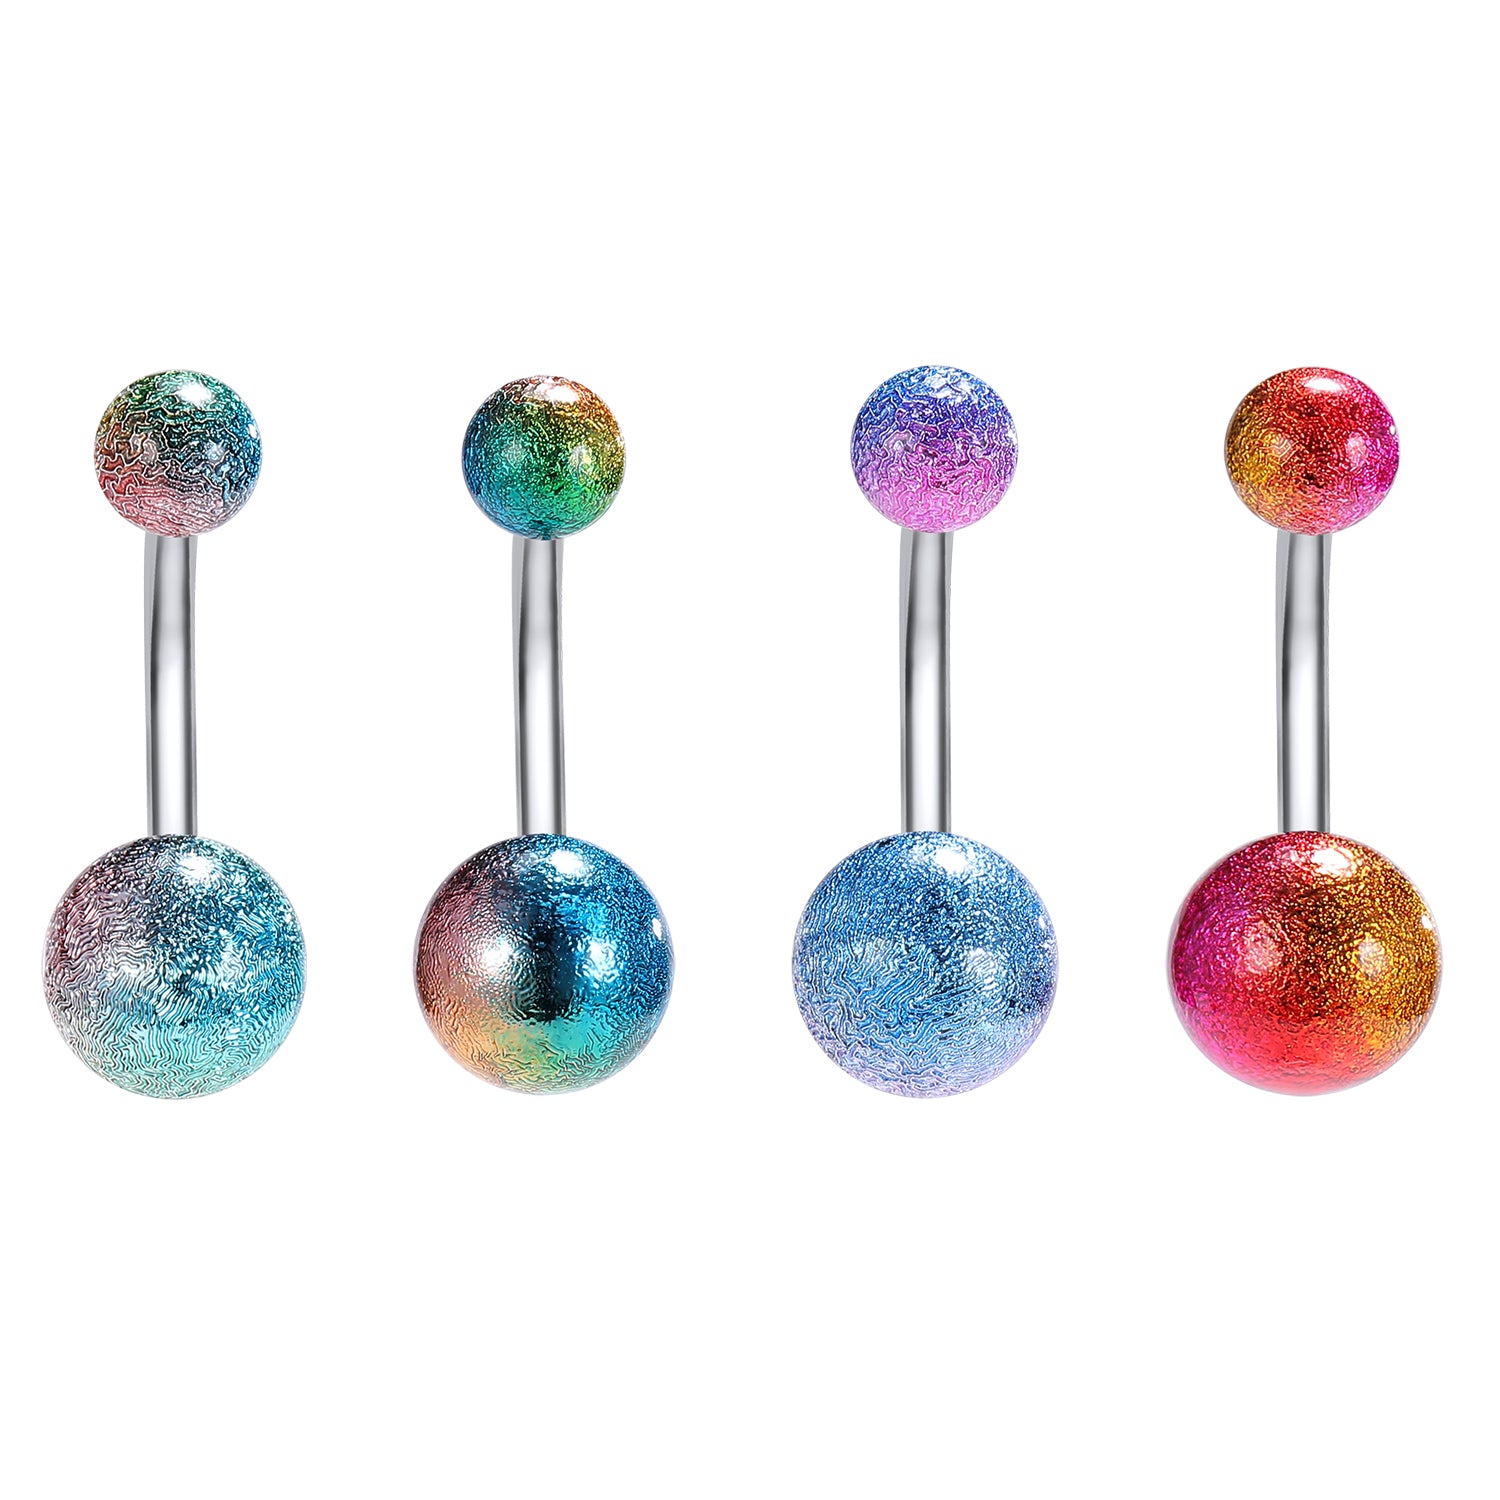 14g-stainless-steel-belly-button-rings-double-ball-belly-navel-piercing-jewelry